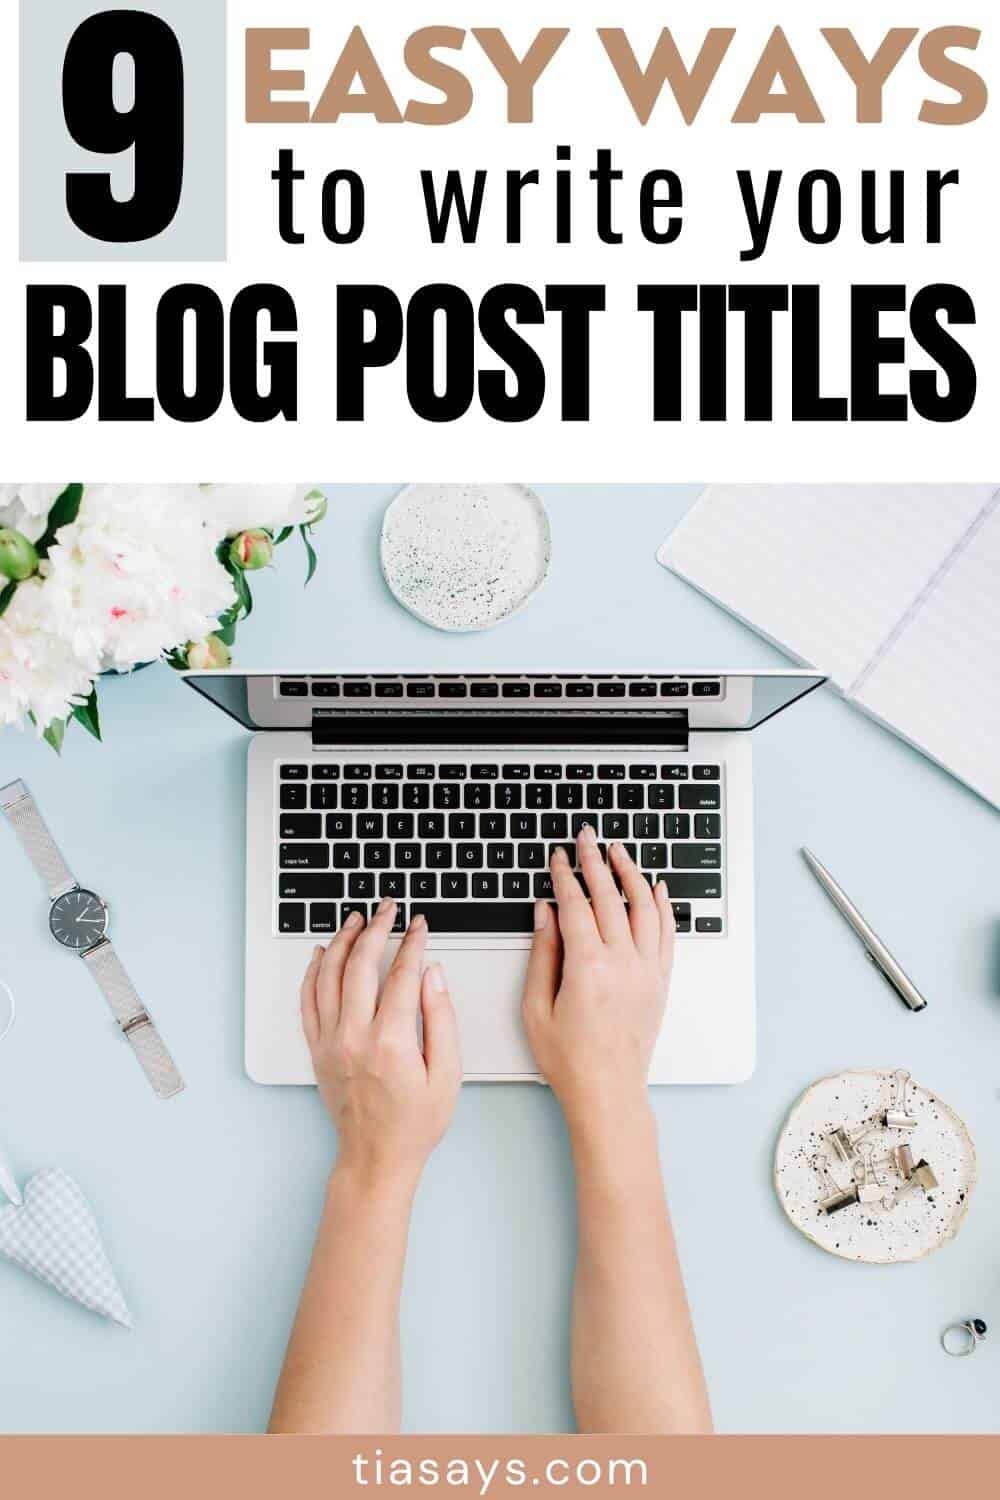 how to write a blog post title?